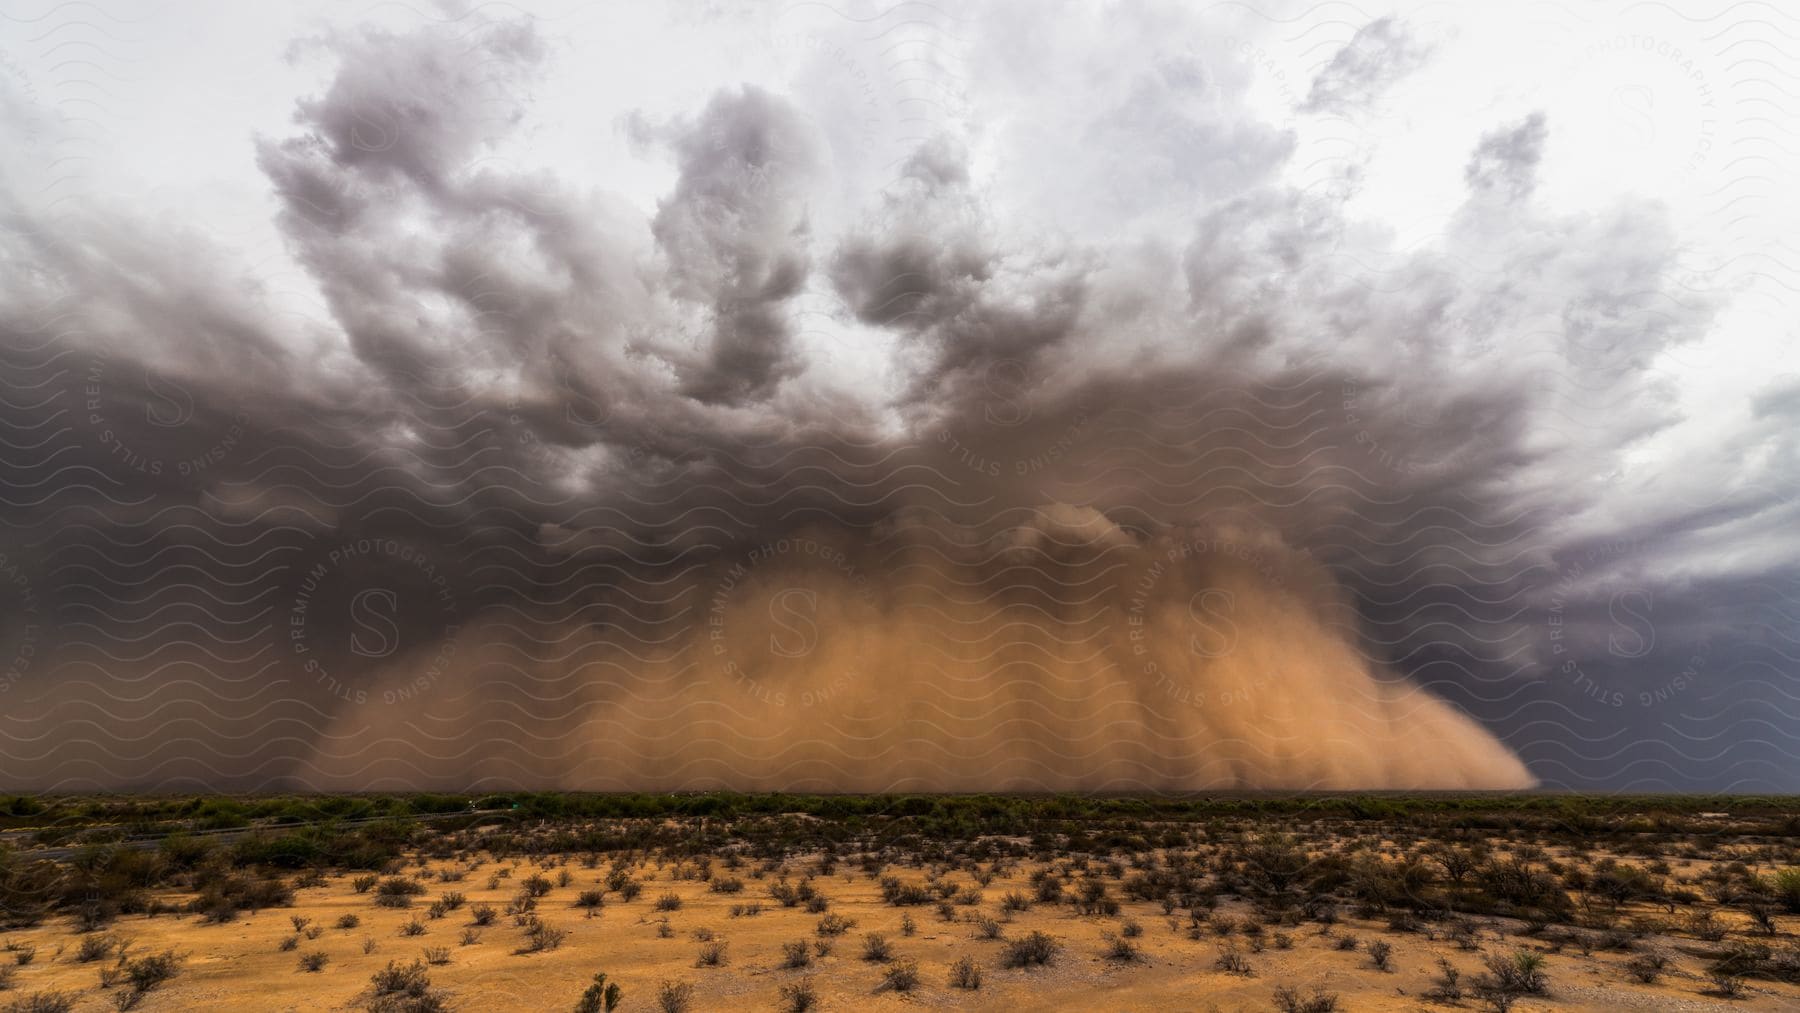 A massive haboob storm approaching vekol valley road along interstate 8 on july 9th